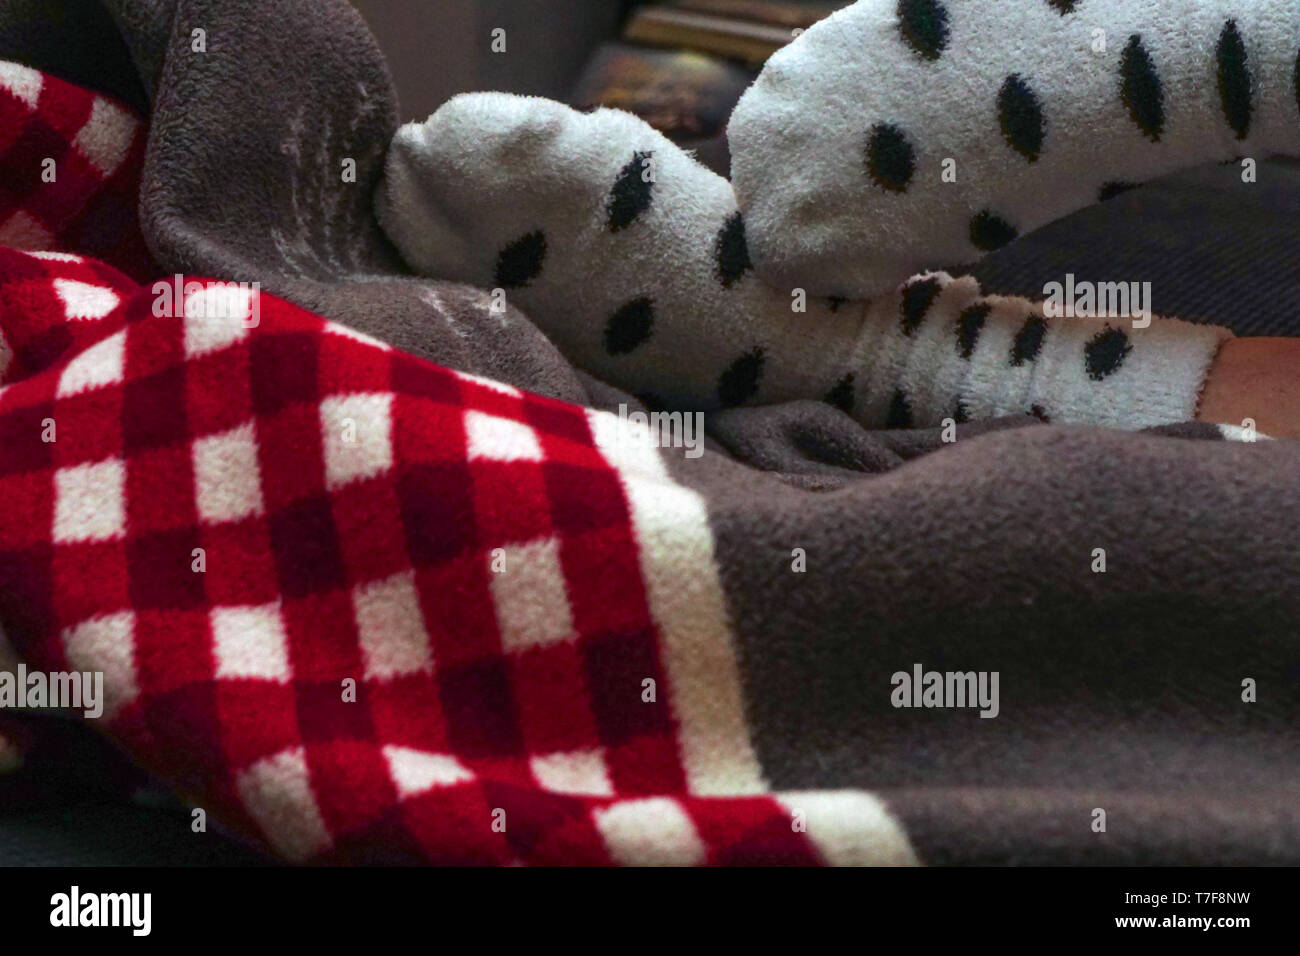 Red and white blanket and feet with white dotted socks chilling at home close up view Stock Photo